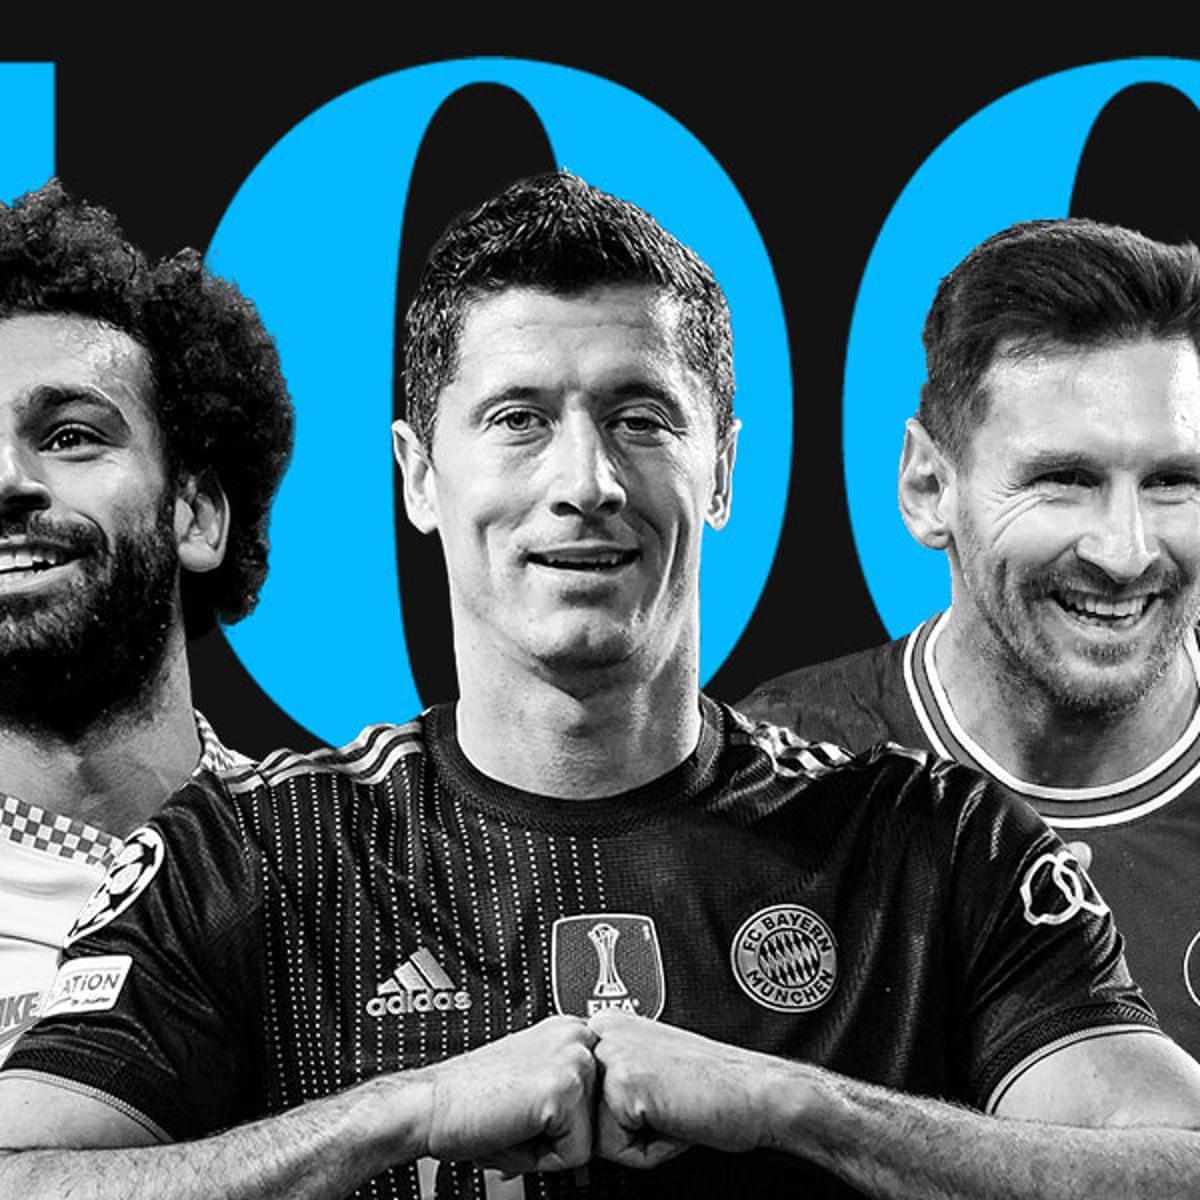 The 100 best male footballers in the world 2021 | Soccer | The Guardian